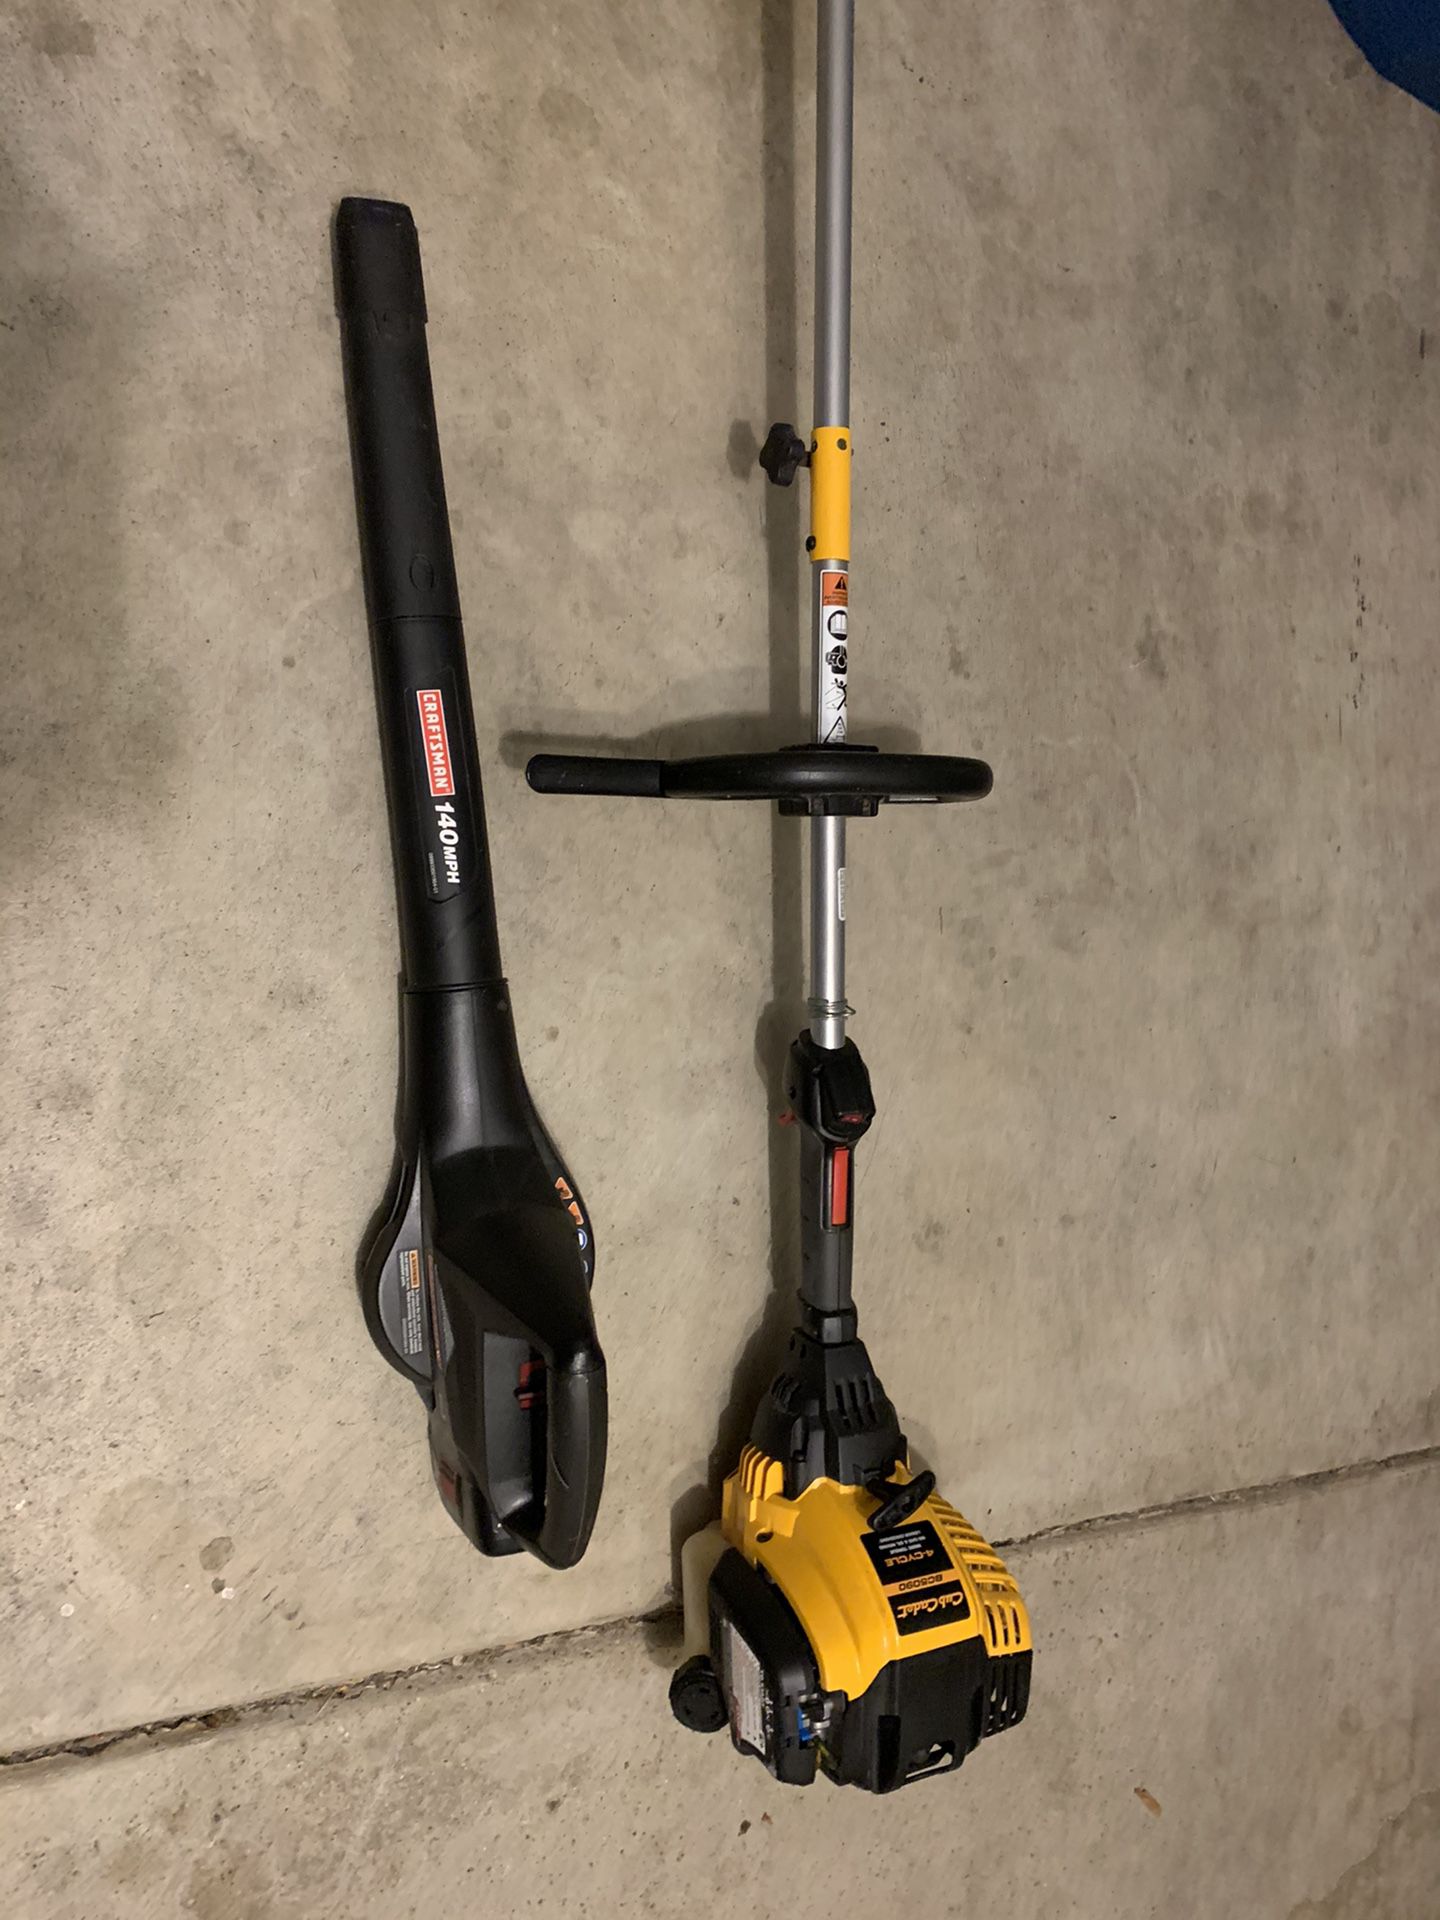 Cub Cadet 4 Cycle Trimmer and Craftsman 19.2 Volt Blower